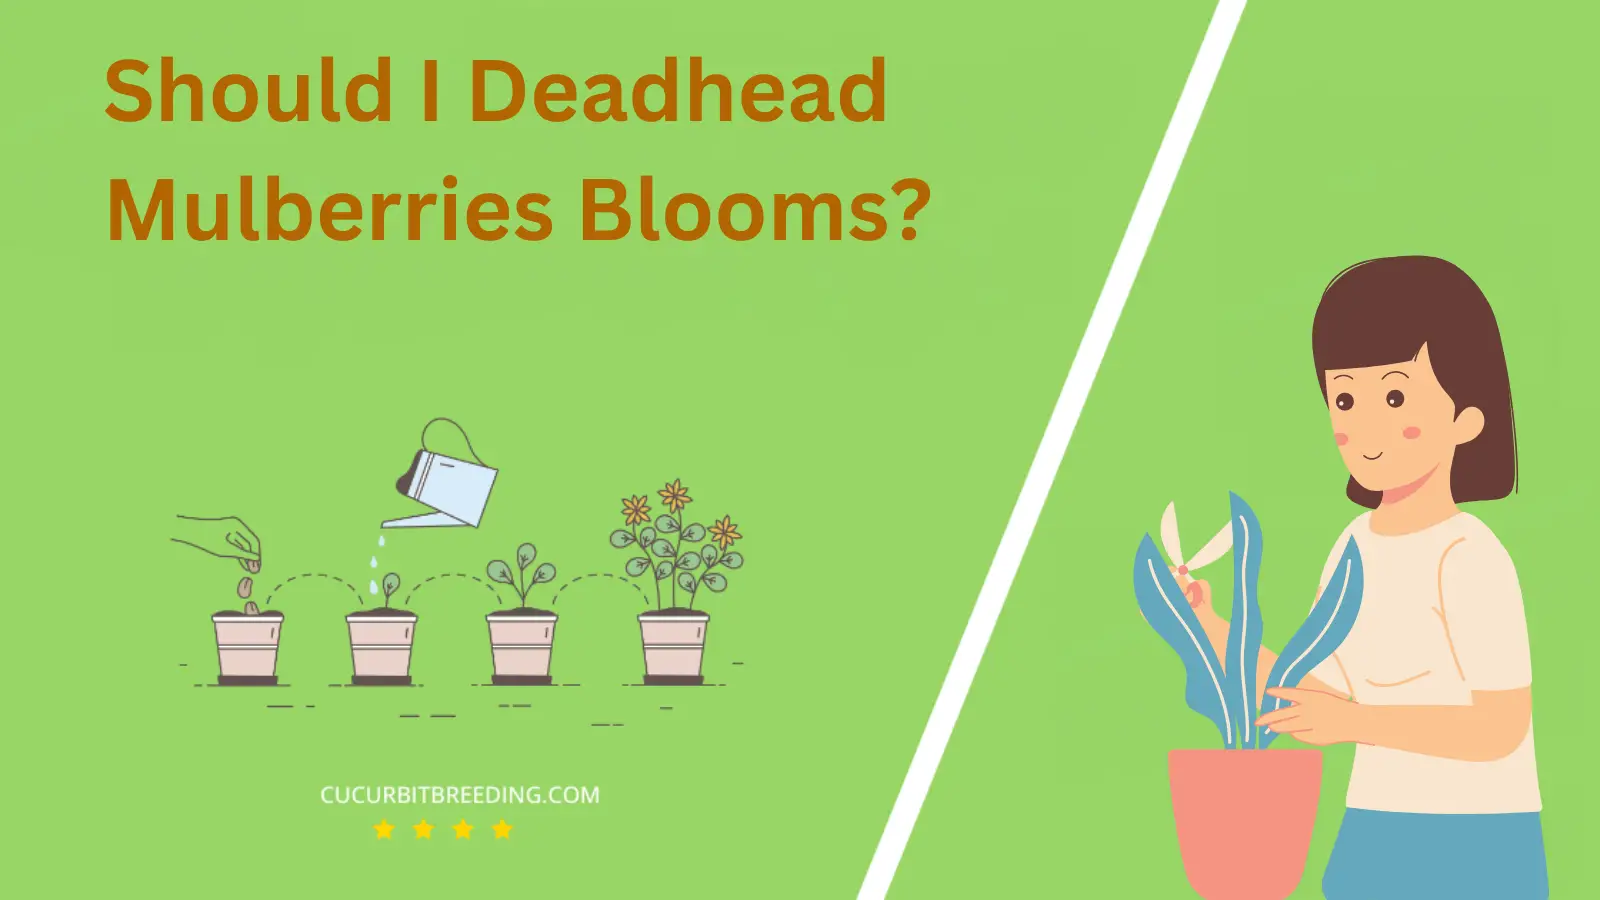 Should I Deadhead Mulberries Blooms?